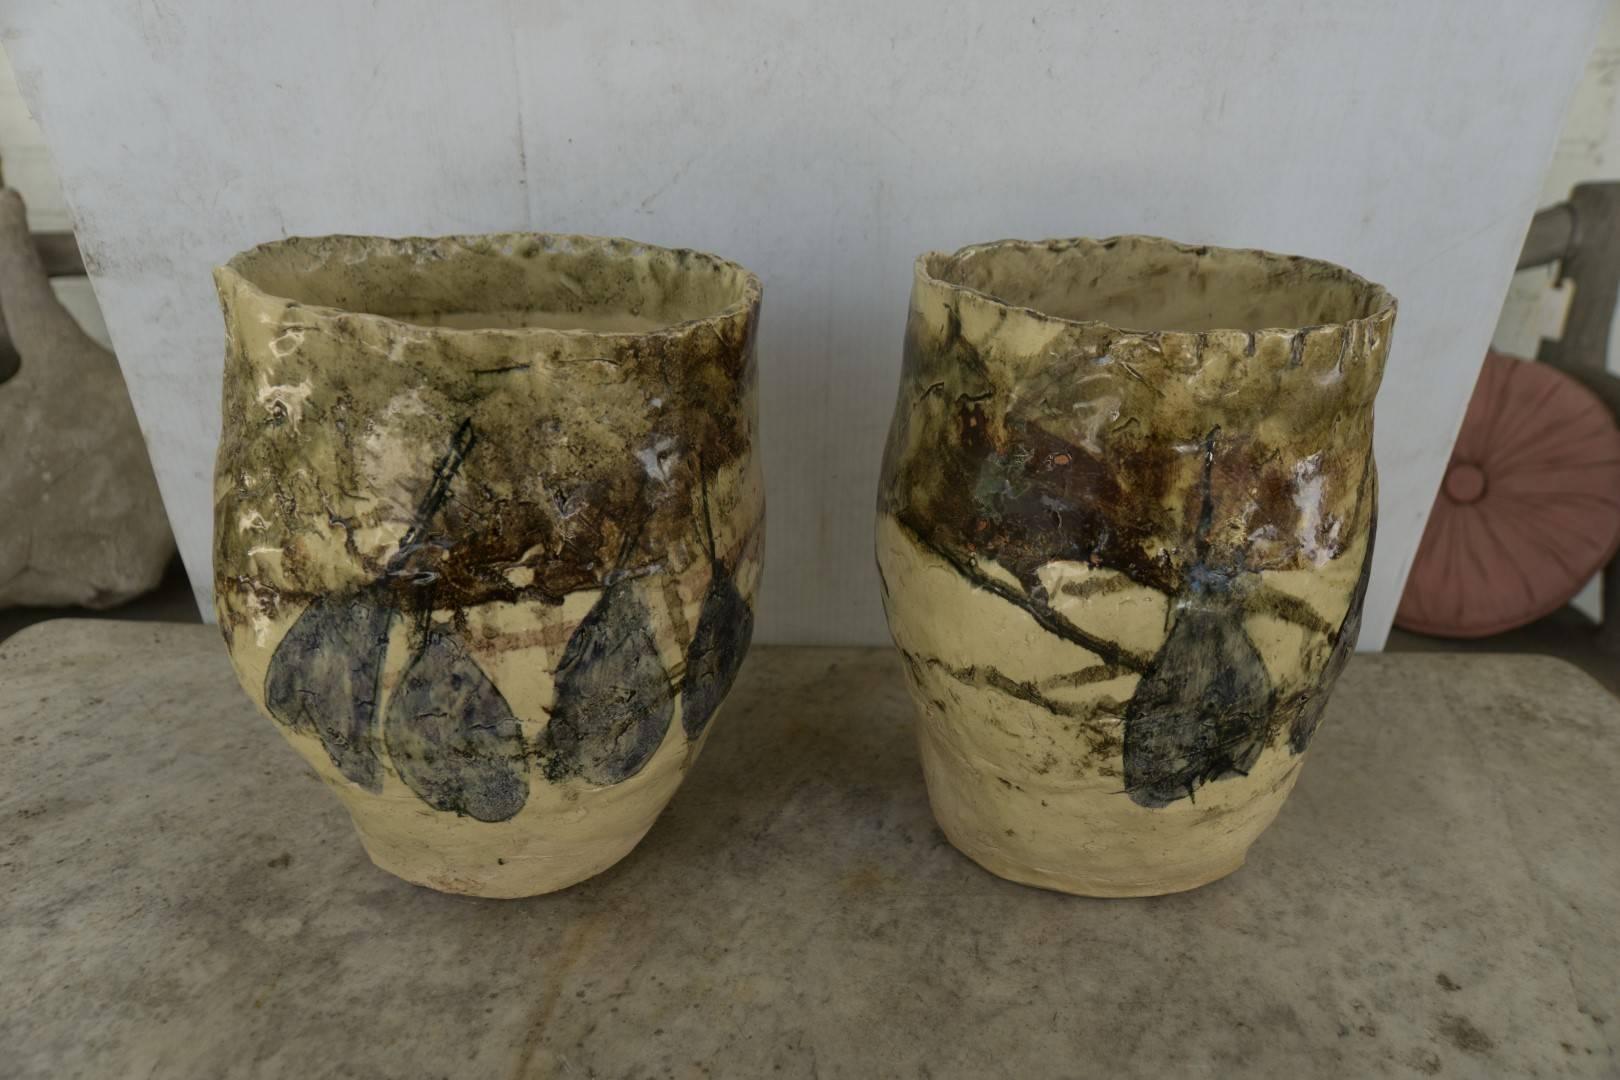 French Mid-Century Modern pair of hand thrown terra cotta vases in yellow glaze with figs painted on
Measures: 8” D x 10” H
$450.00ea.